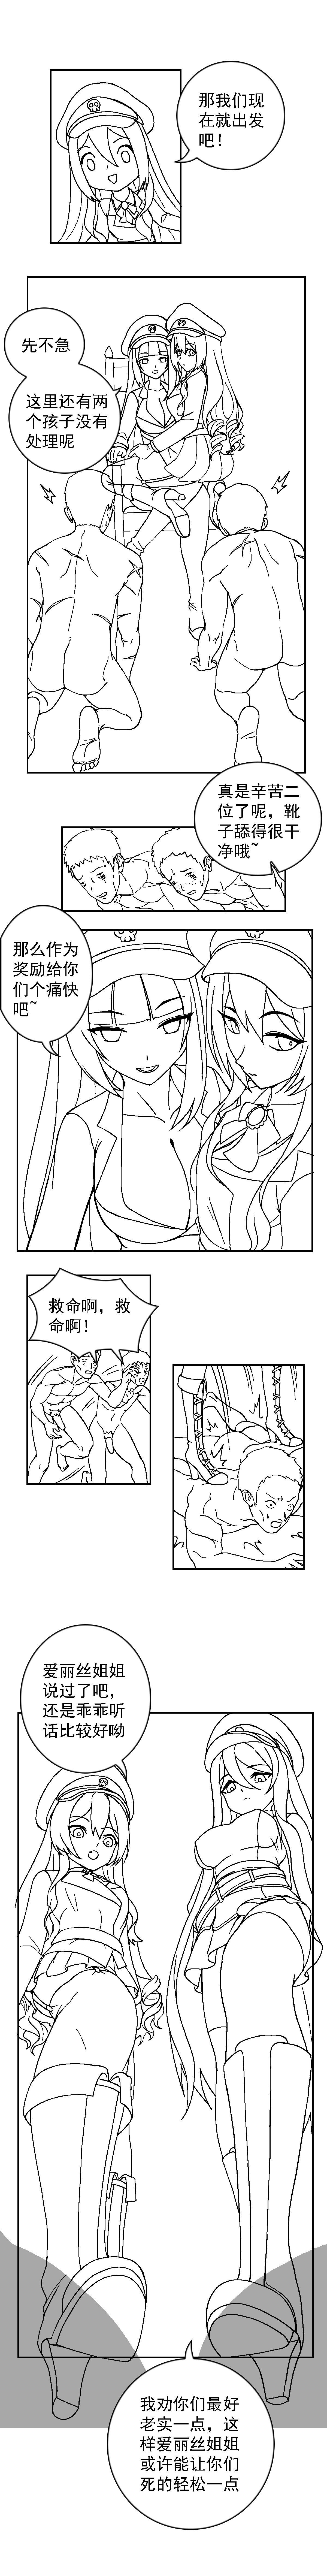 Gayhardcore [Weixiefashi] The Cruel Empire Executioners black-and-white [帝国处刑官爱丽丝2：残酷的处刑天使][黑白] Foot Fetish - Page 5